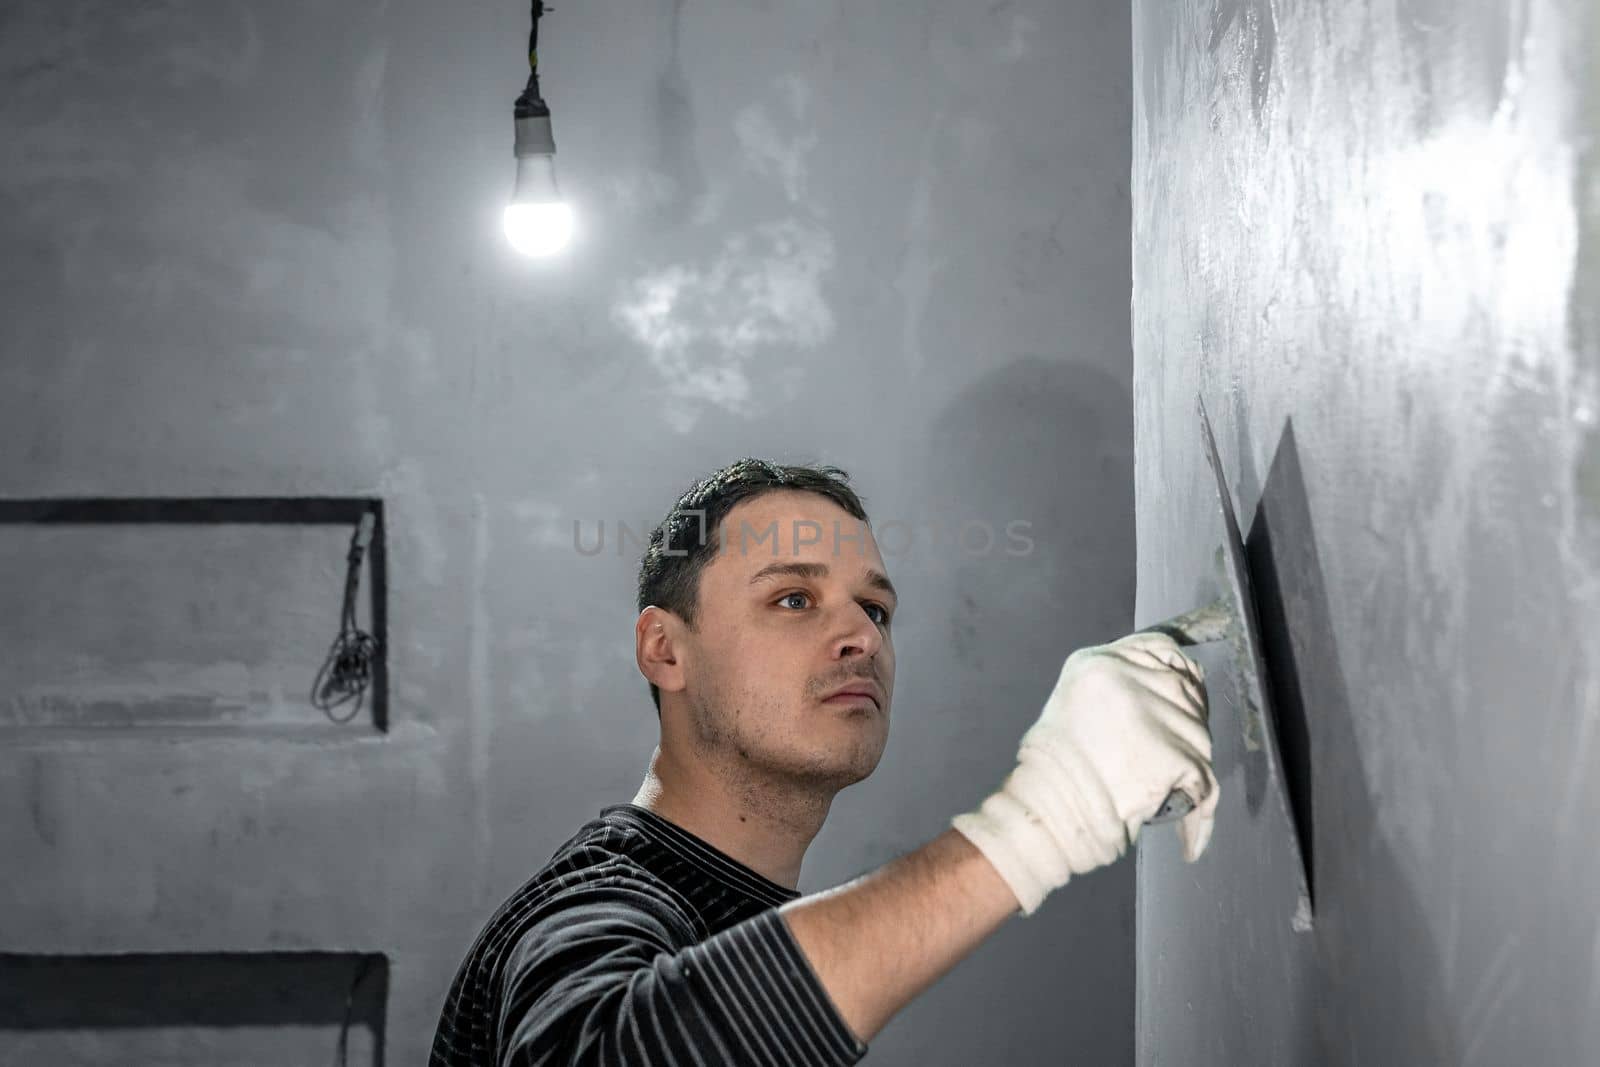 man applies insulation to a bathroom wall by Edophoto